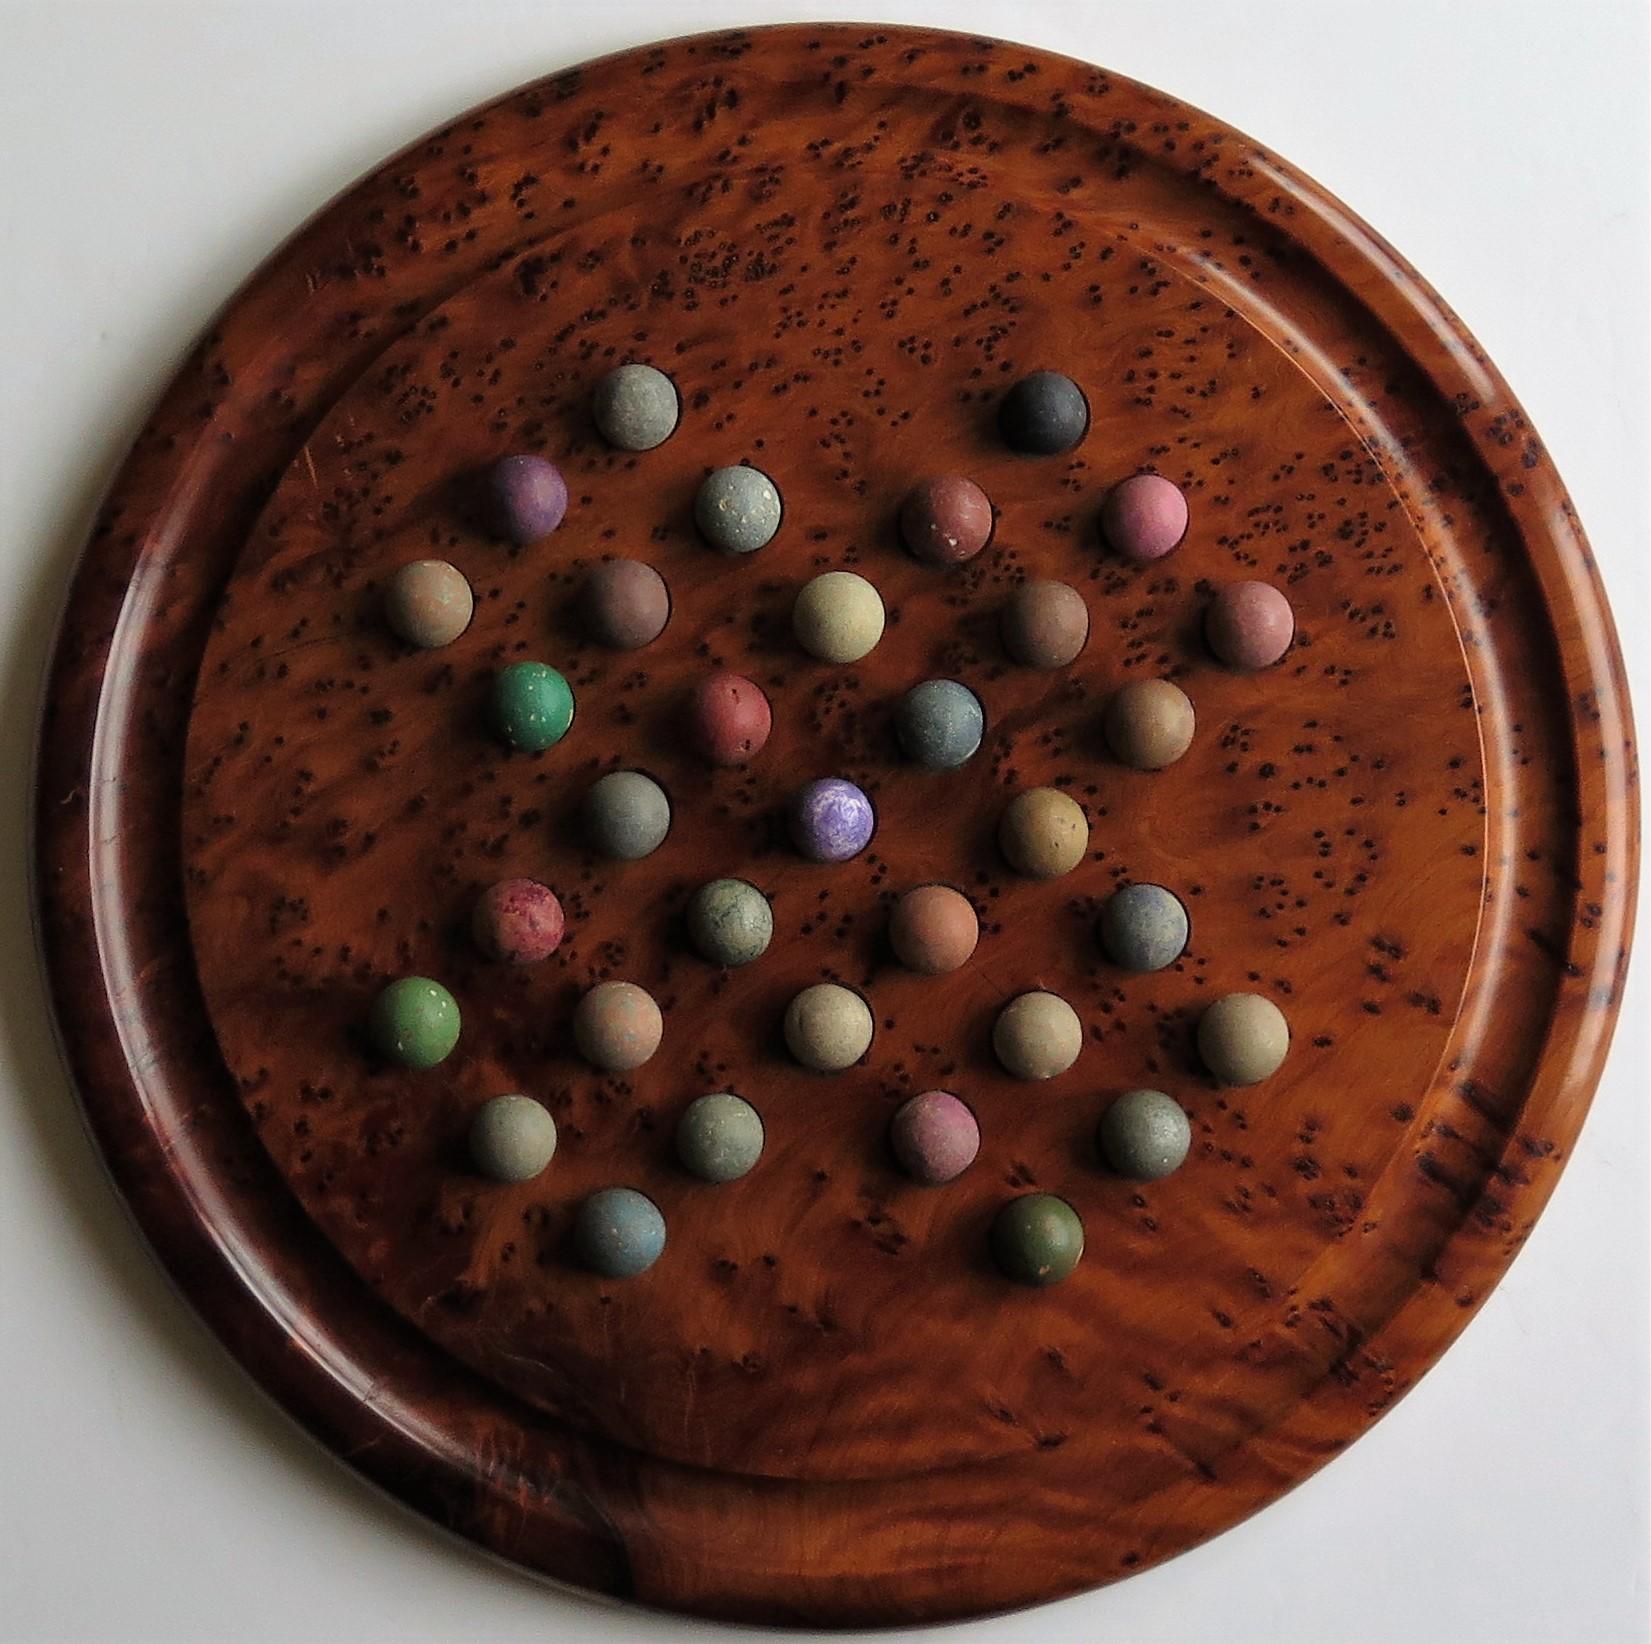 This is a complete board game of marble solitaire with a large turned maple board from the 20th century and handmade clay or stone marbles from the mid-19th century.

The circular turned board has a large diameter and is very attractive being made